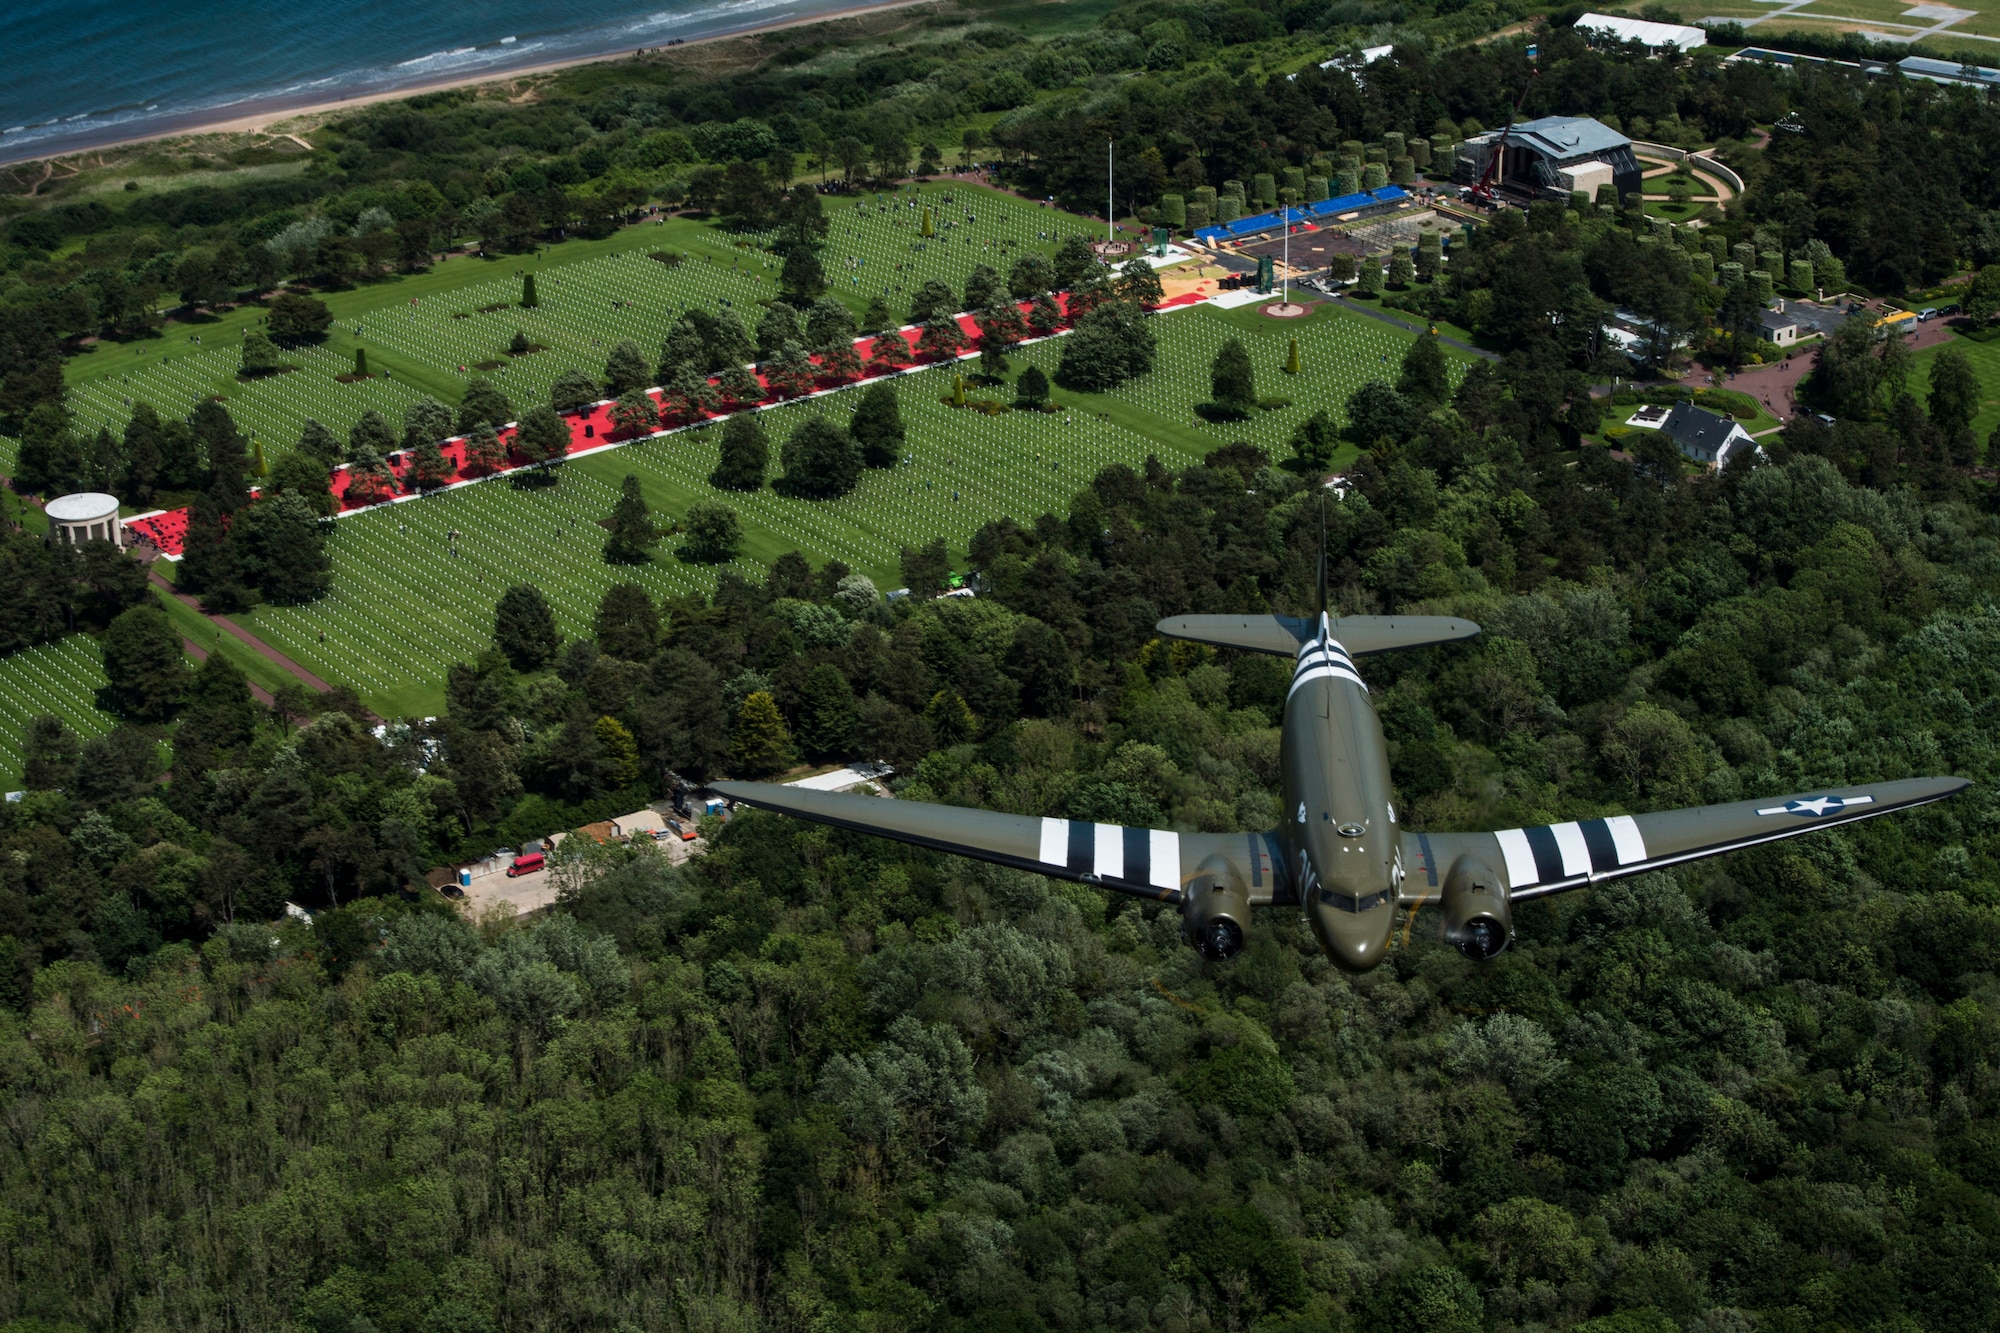 A Douglas C-47 Dakota, nicknamed “That’s All Brother”, flies over the Normandy American Cemetery and Memorial in Colleville-sur-Mer, France, June 8, 2019. “That’s All Brother” flew combat missions during Operation Neptune June 6, 1944. The C-47 conducted an interfly mission with a U.S. Air Force C-130J Super Hercules wearing identical invasion markings. (U.S. Air Force photo by Senior Airman Devin M. Rumbaugh)